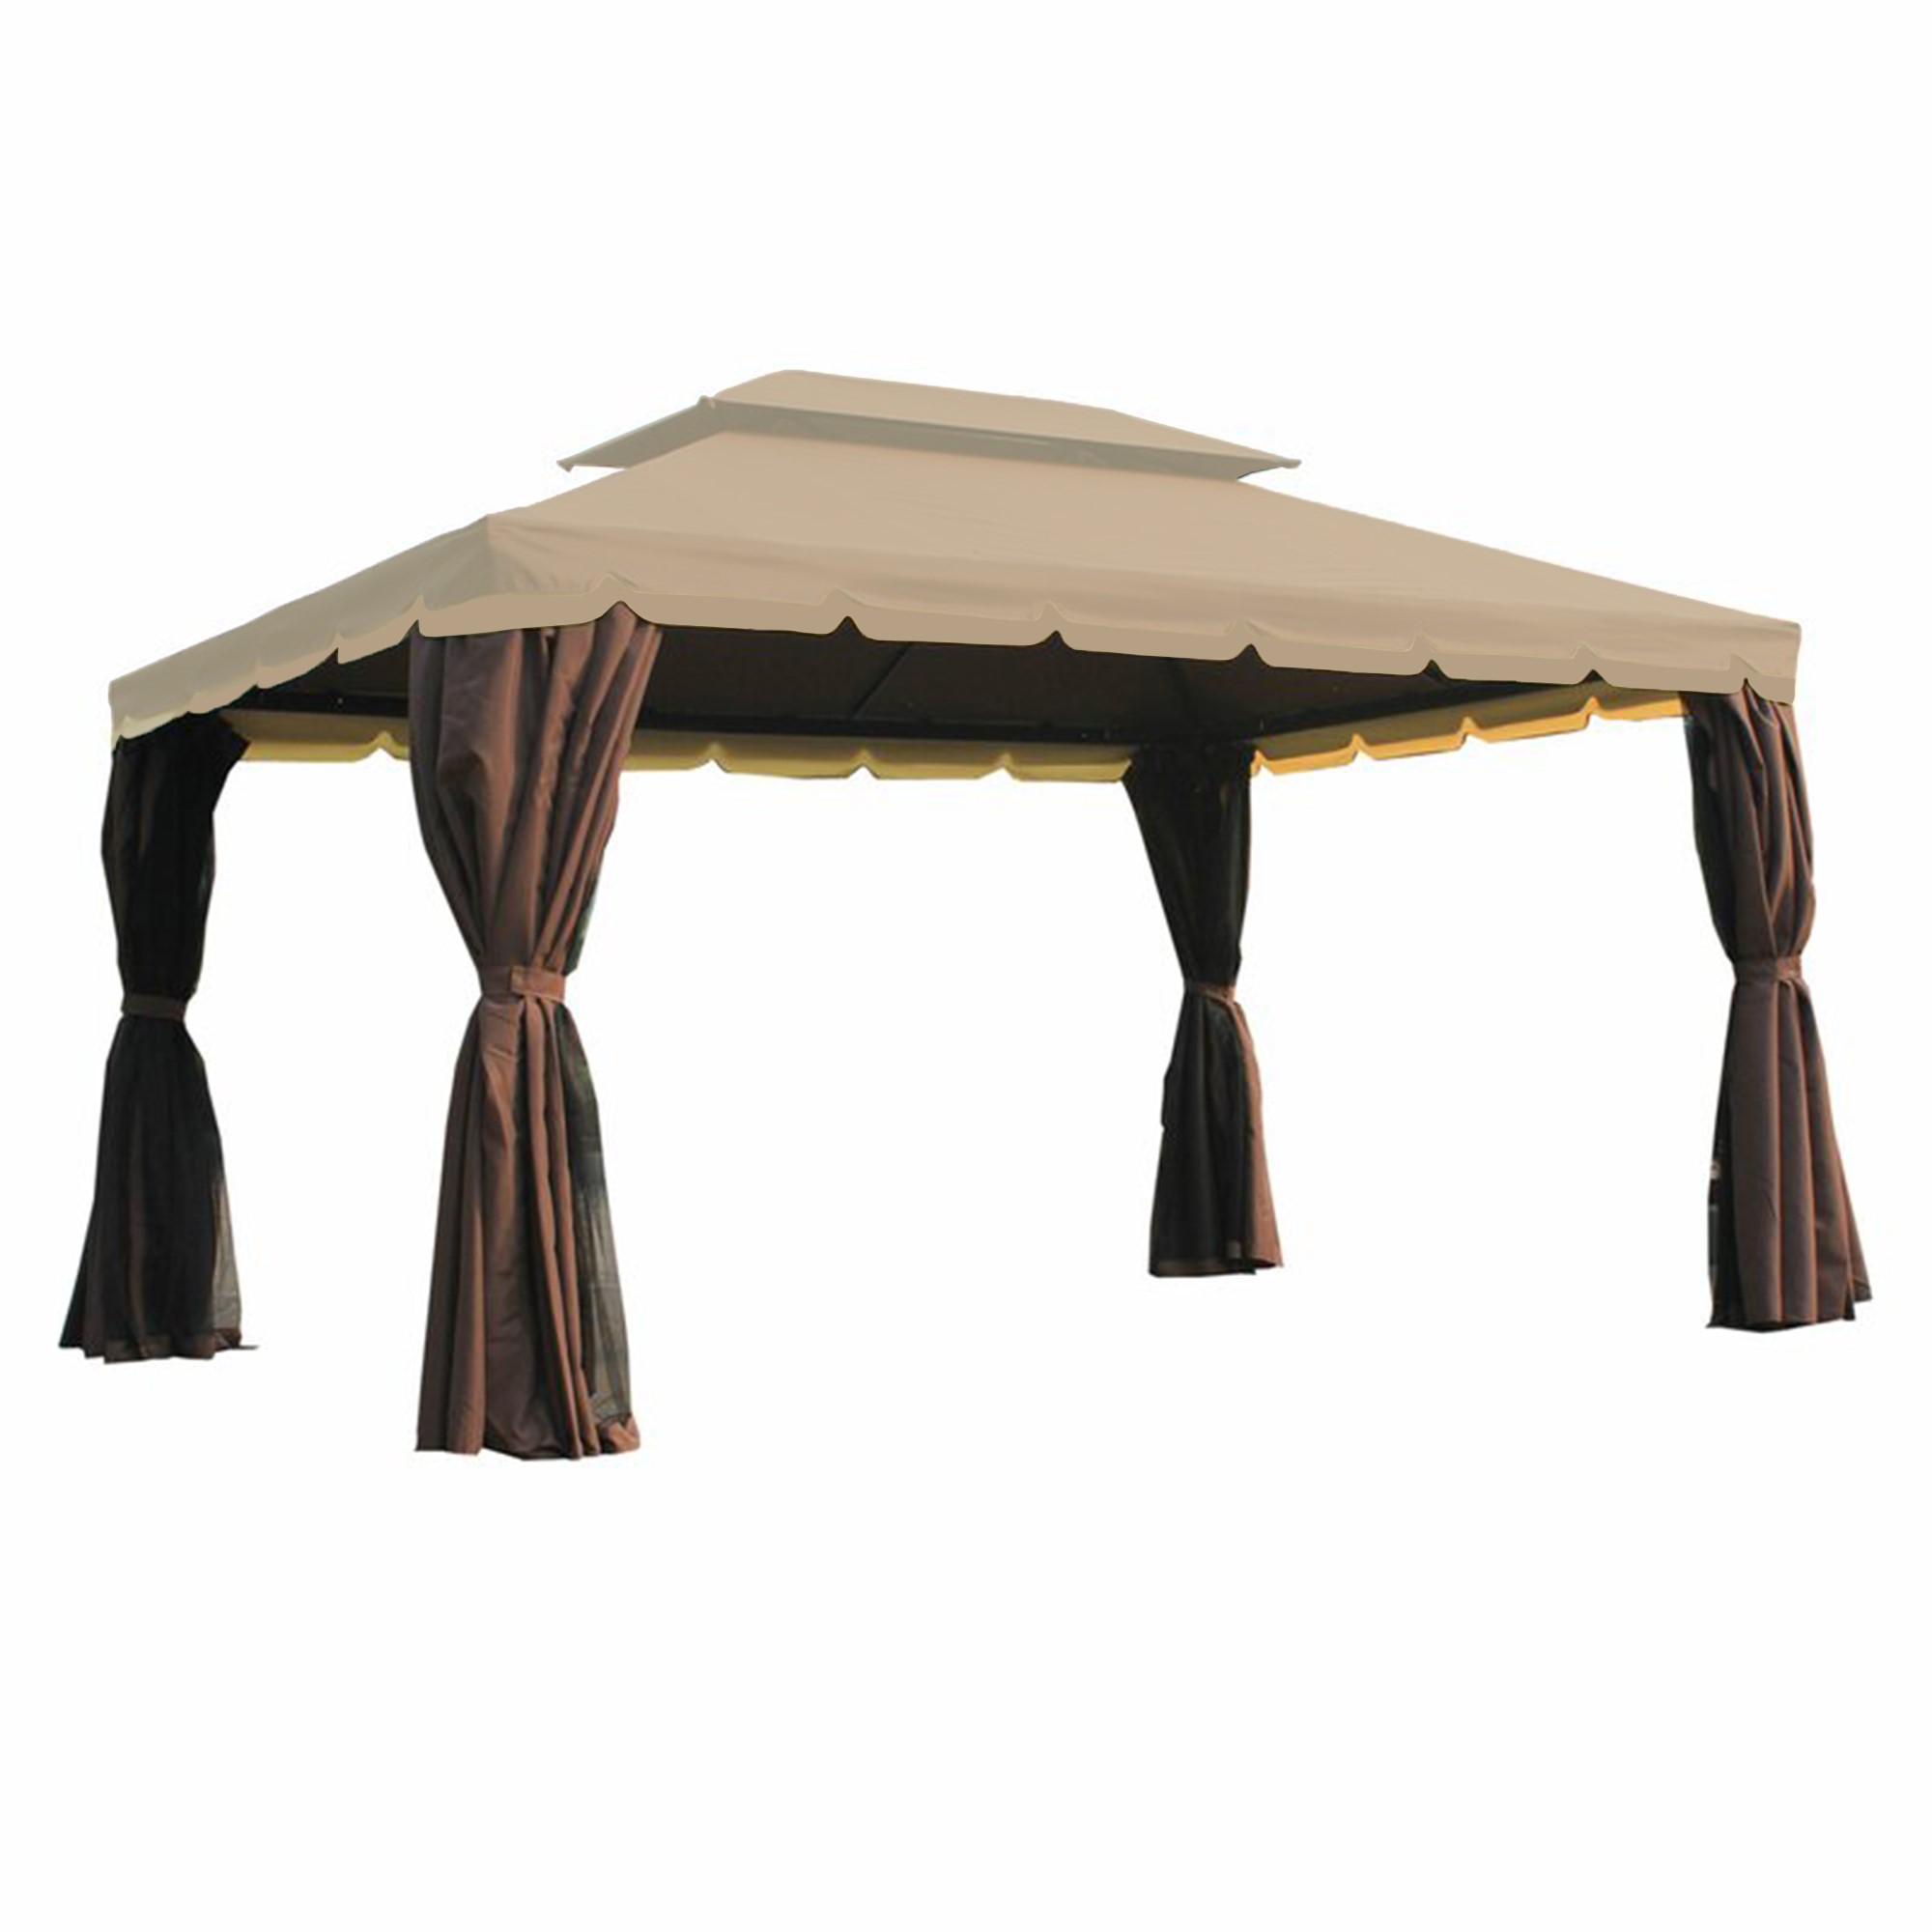 Replacement Canopy for 01-0879 Classic 10 x 13 Gazebo - Riplock